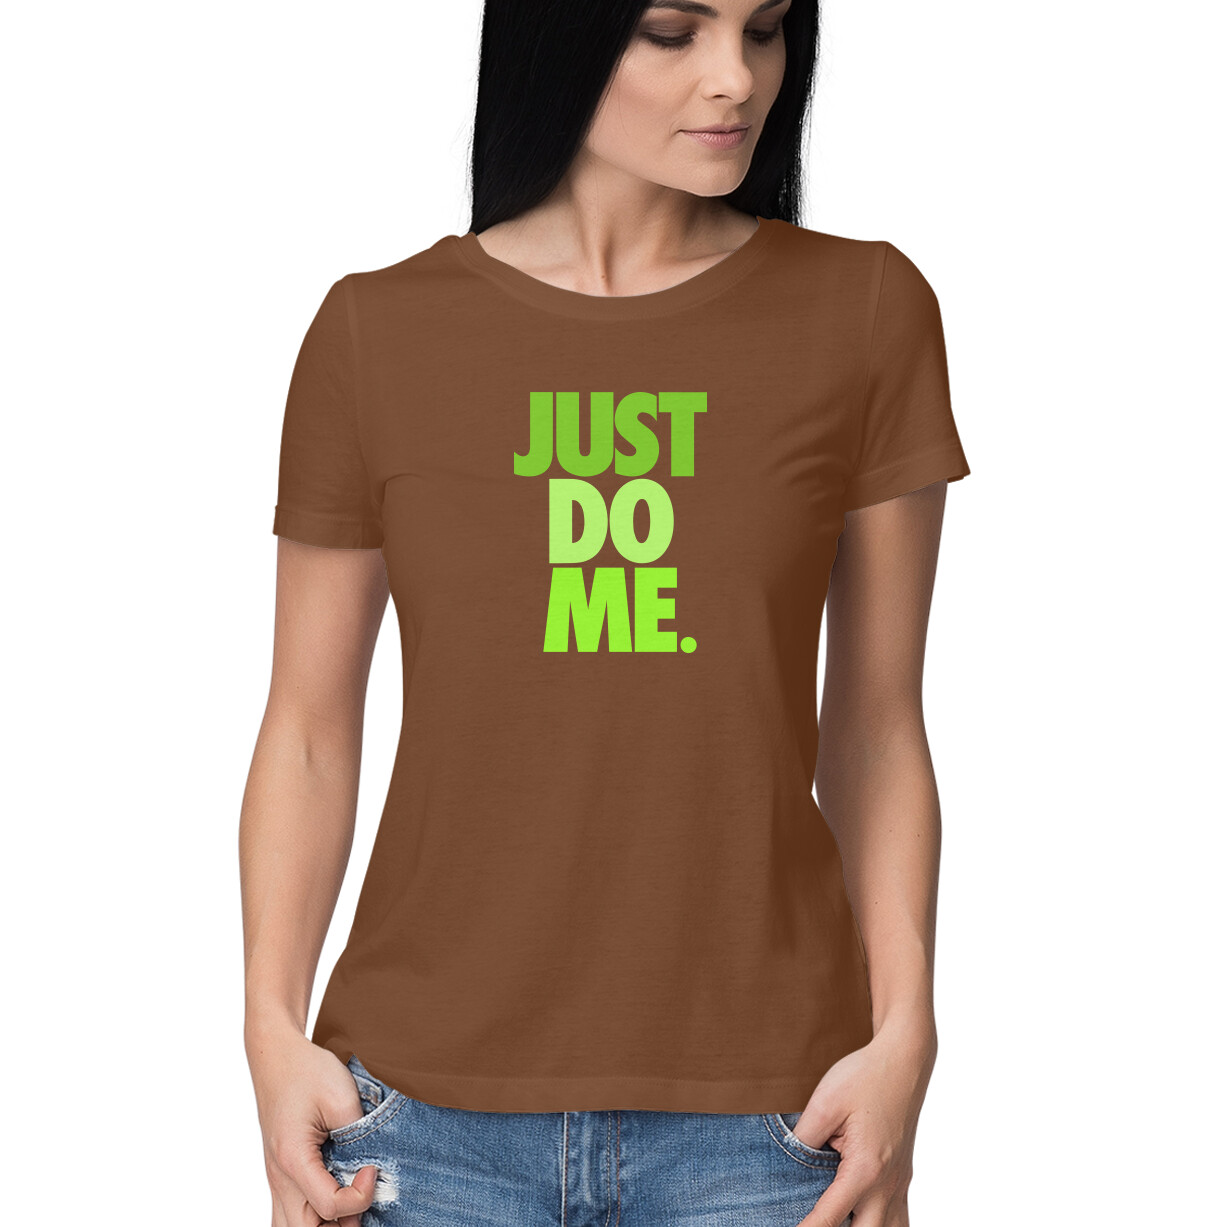 JUST DO ME, Funny T-shirt quotes and sayings